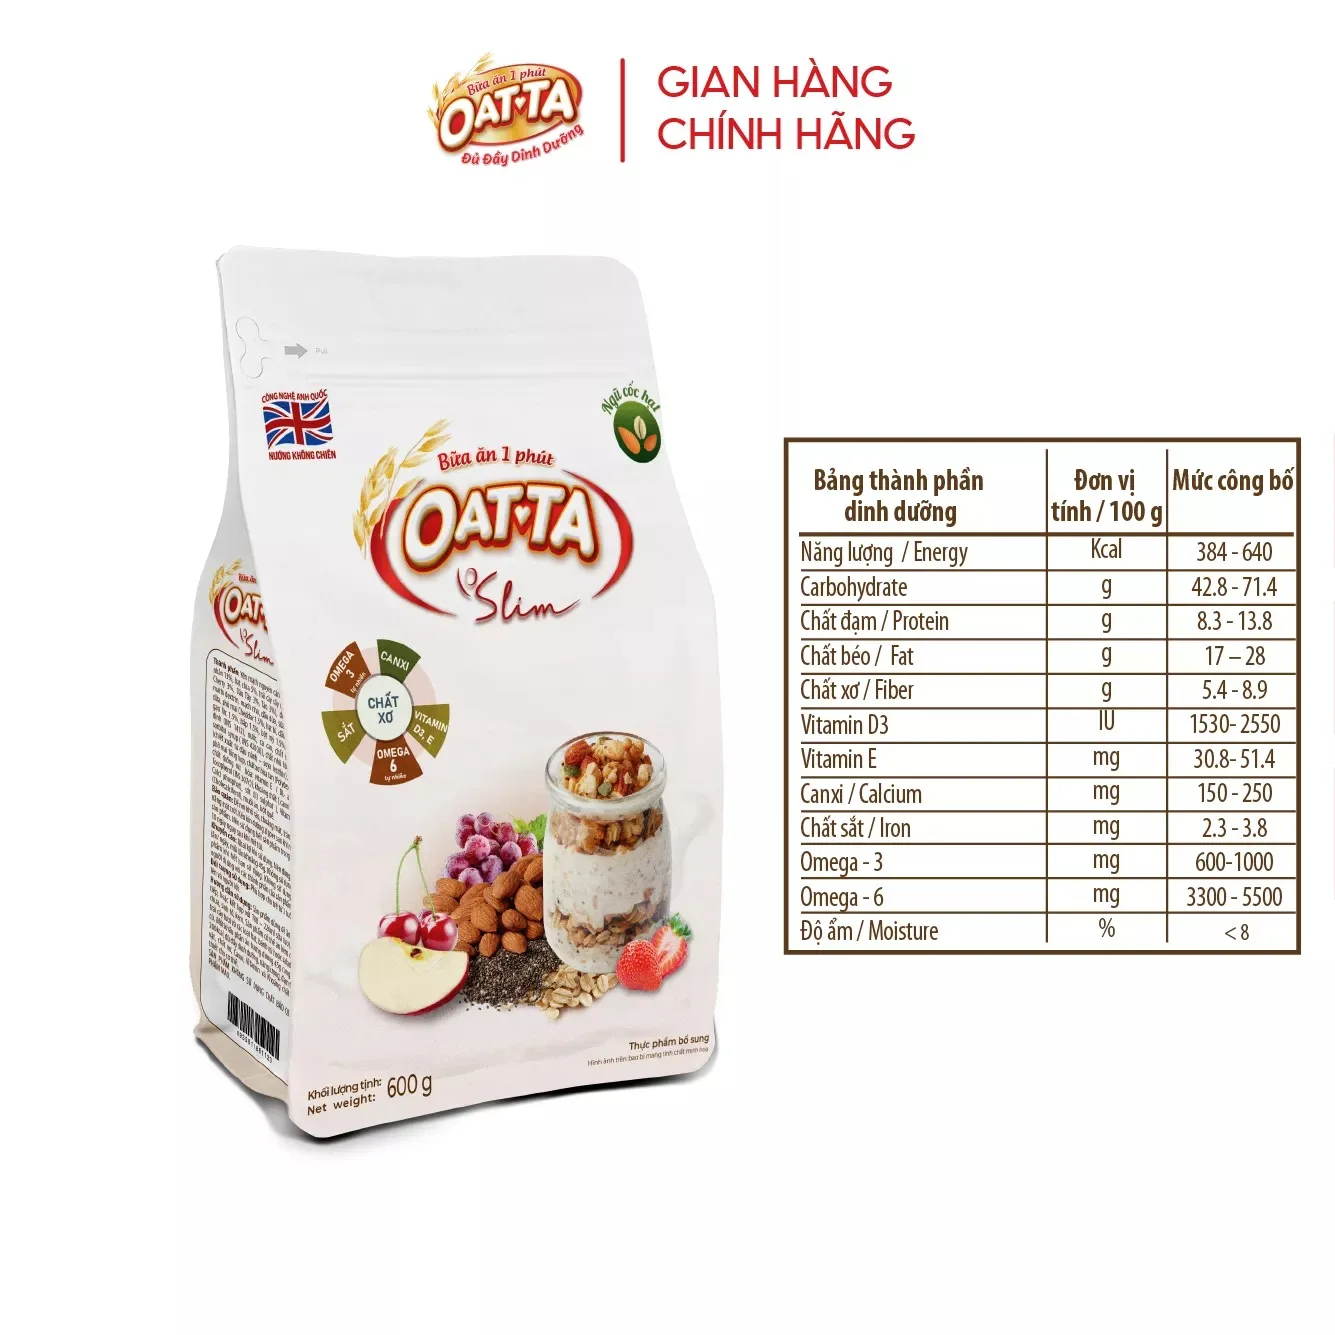 Instant Grain Product Healthy OATTA Slim Granola with Chia seeds Fresh Nutritious Style from Vietnam Factory Reasonable Price